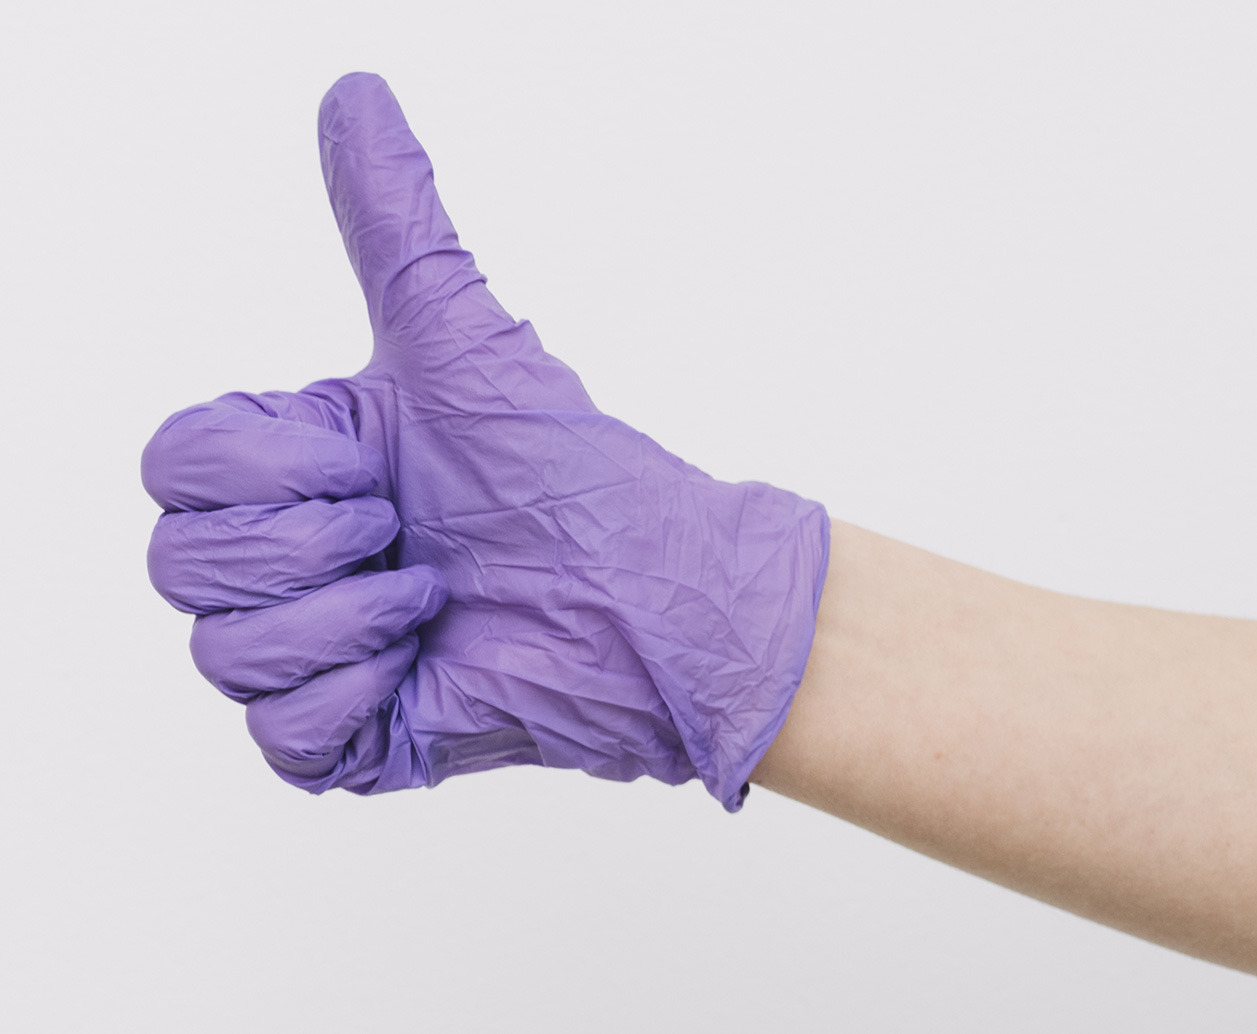 Using Personal Protective Equipment (PPE): Gloves